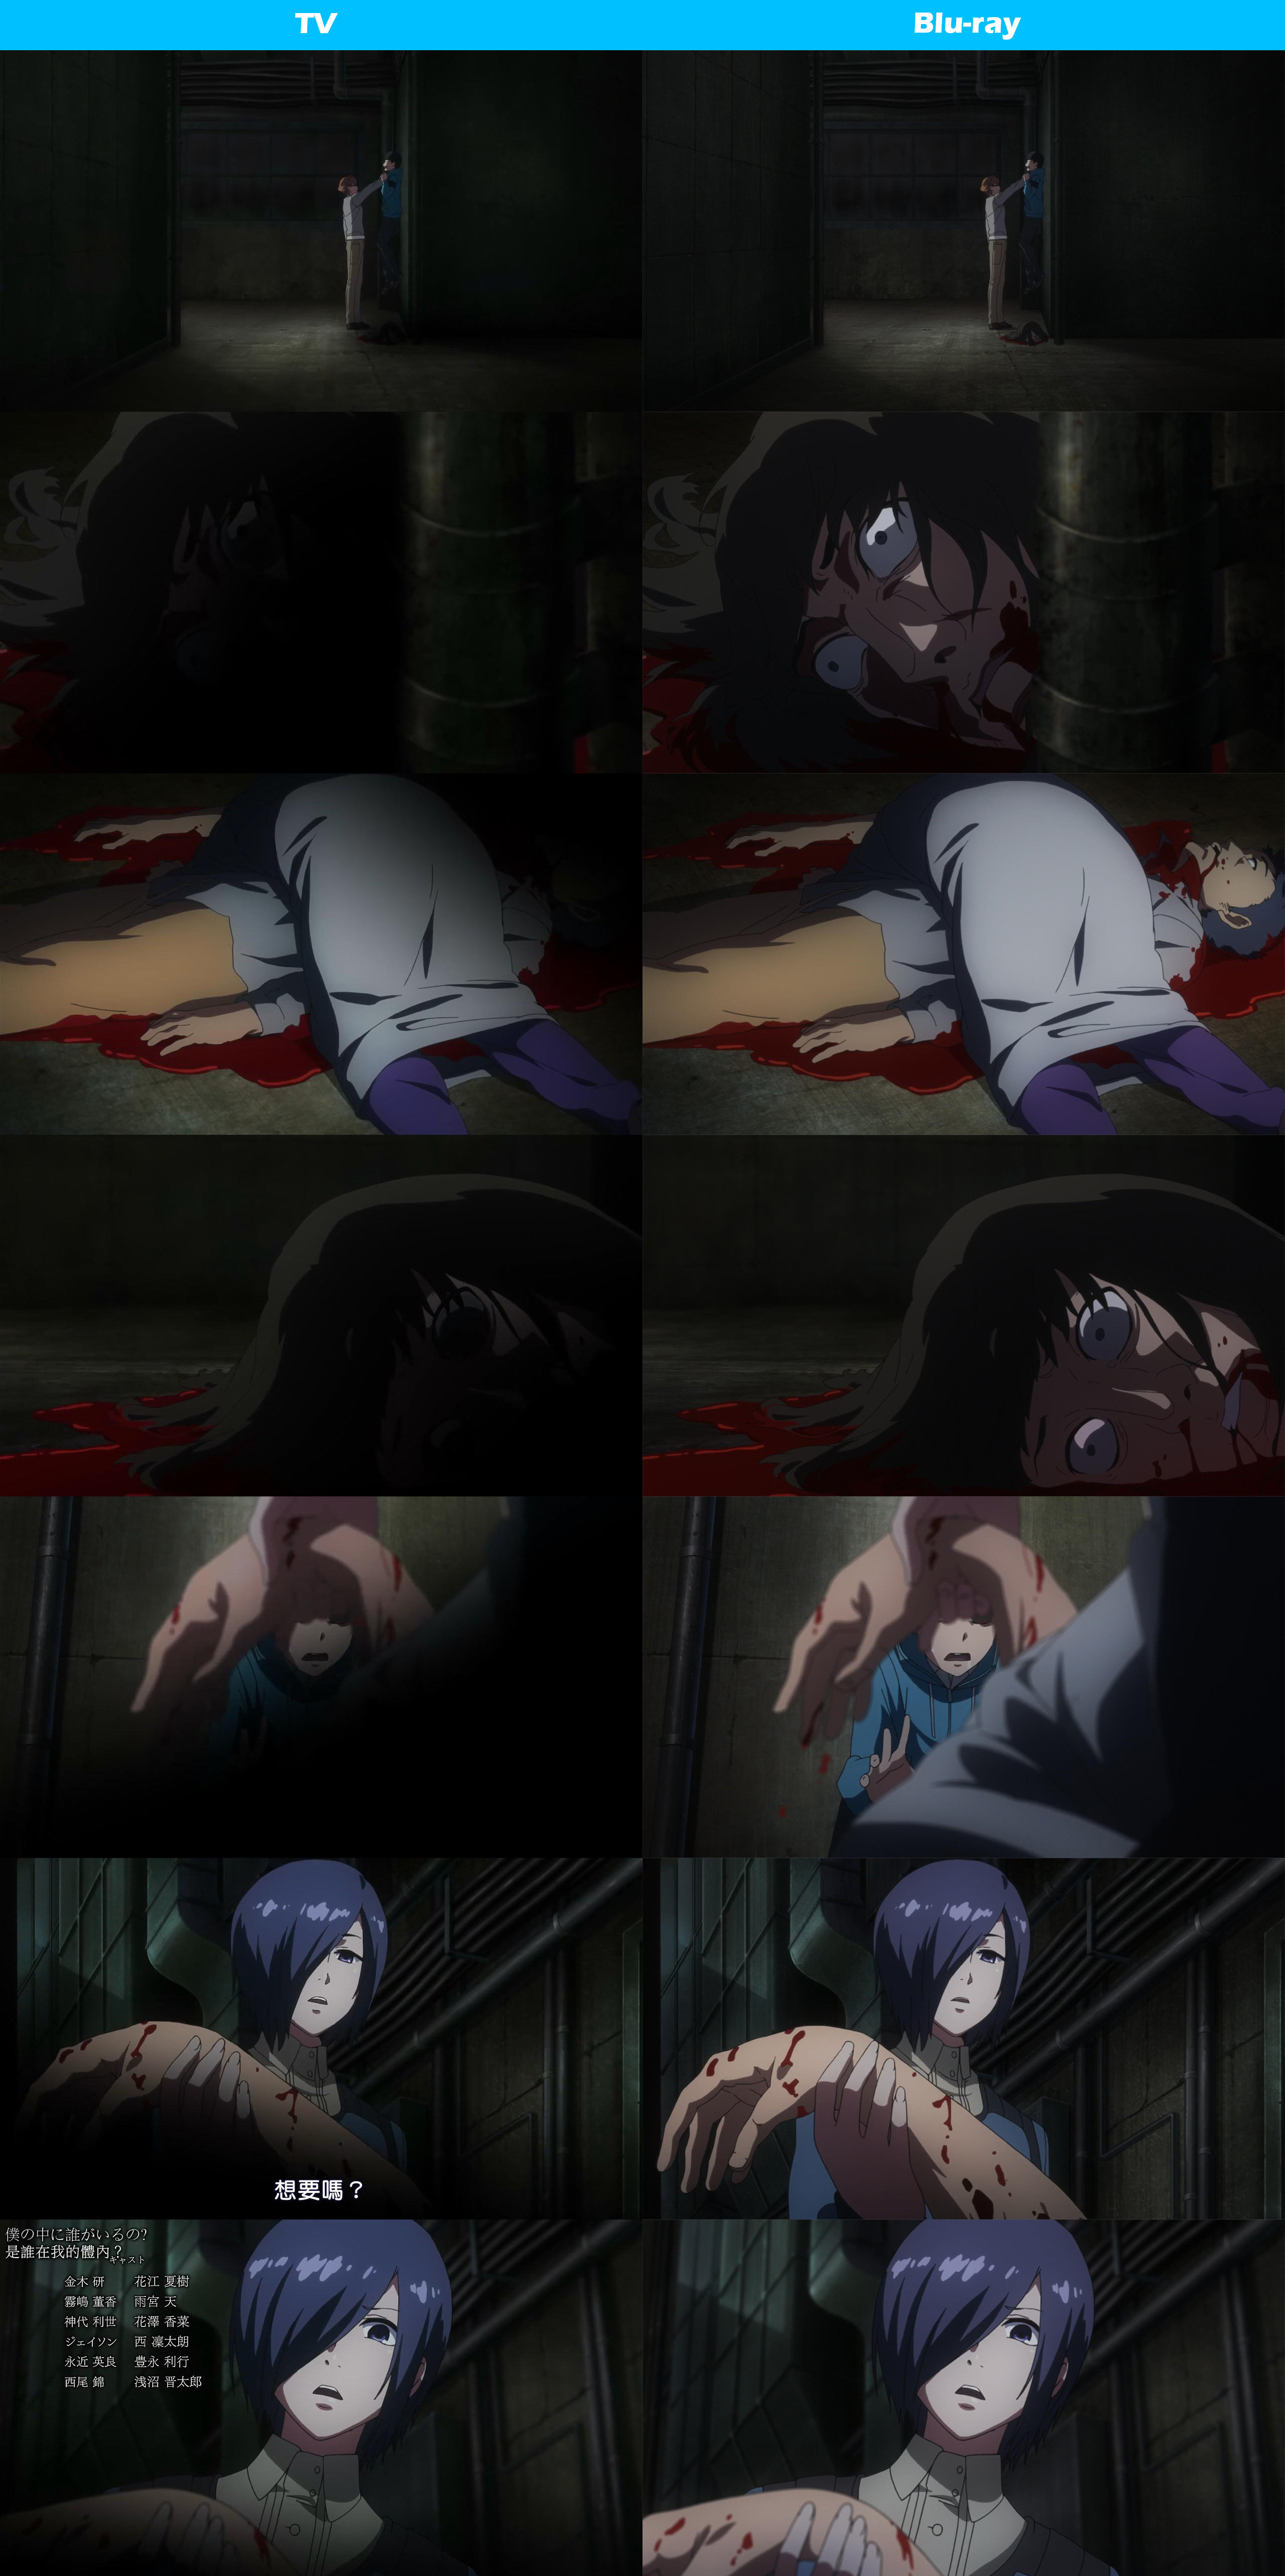 Tokyo Ghoul Episode 10,11, & 12 Uncensored and Censored Comparison